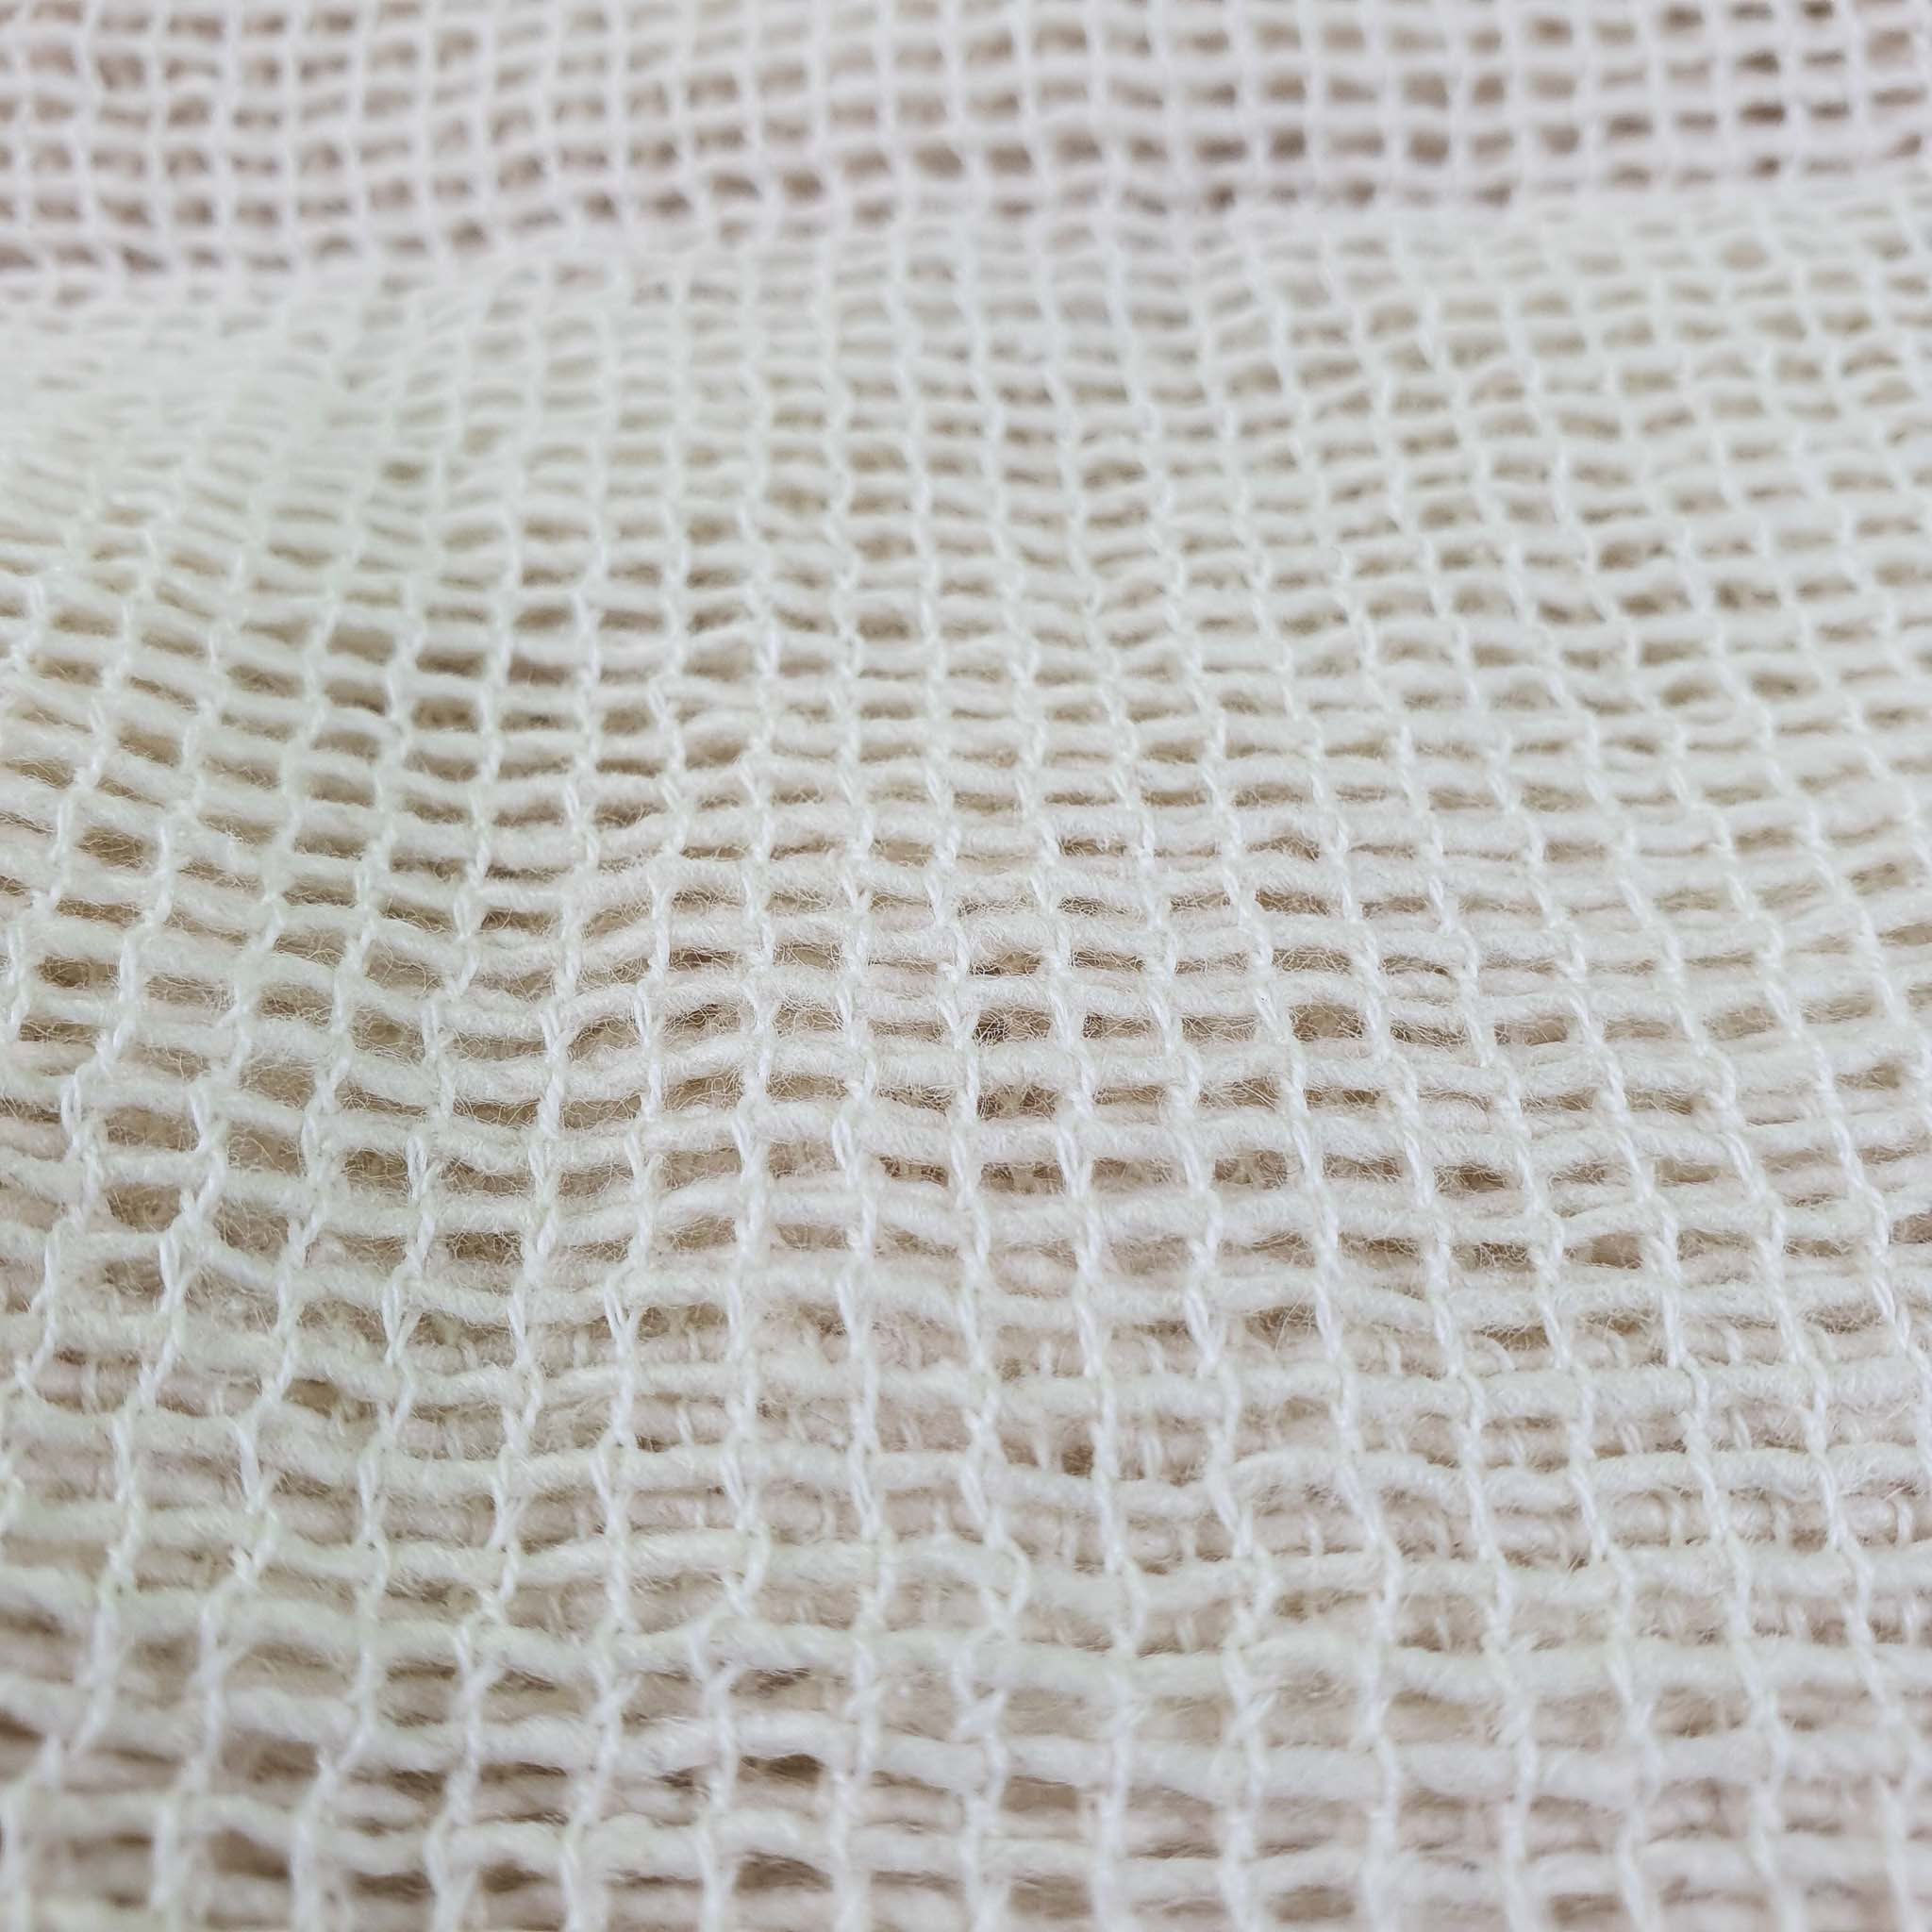 Cotton Mesh Secondary Rug Tufting Fabric Close Up